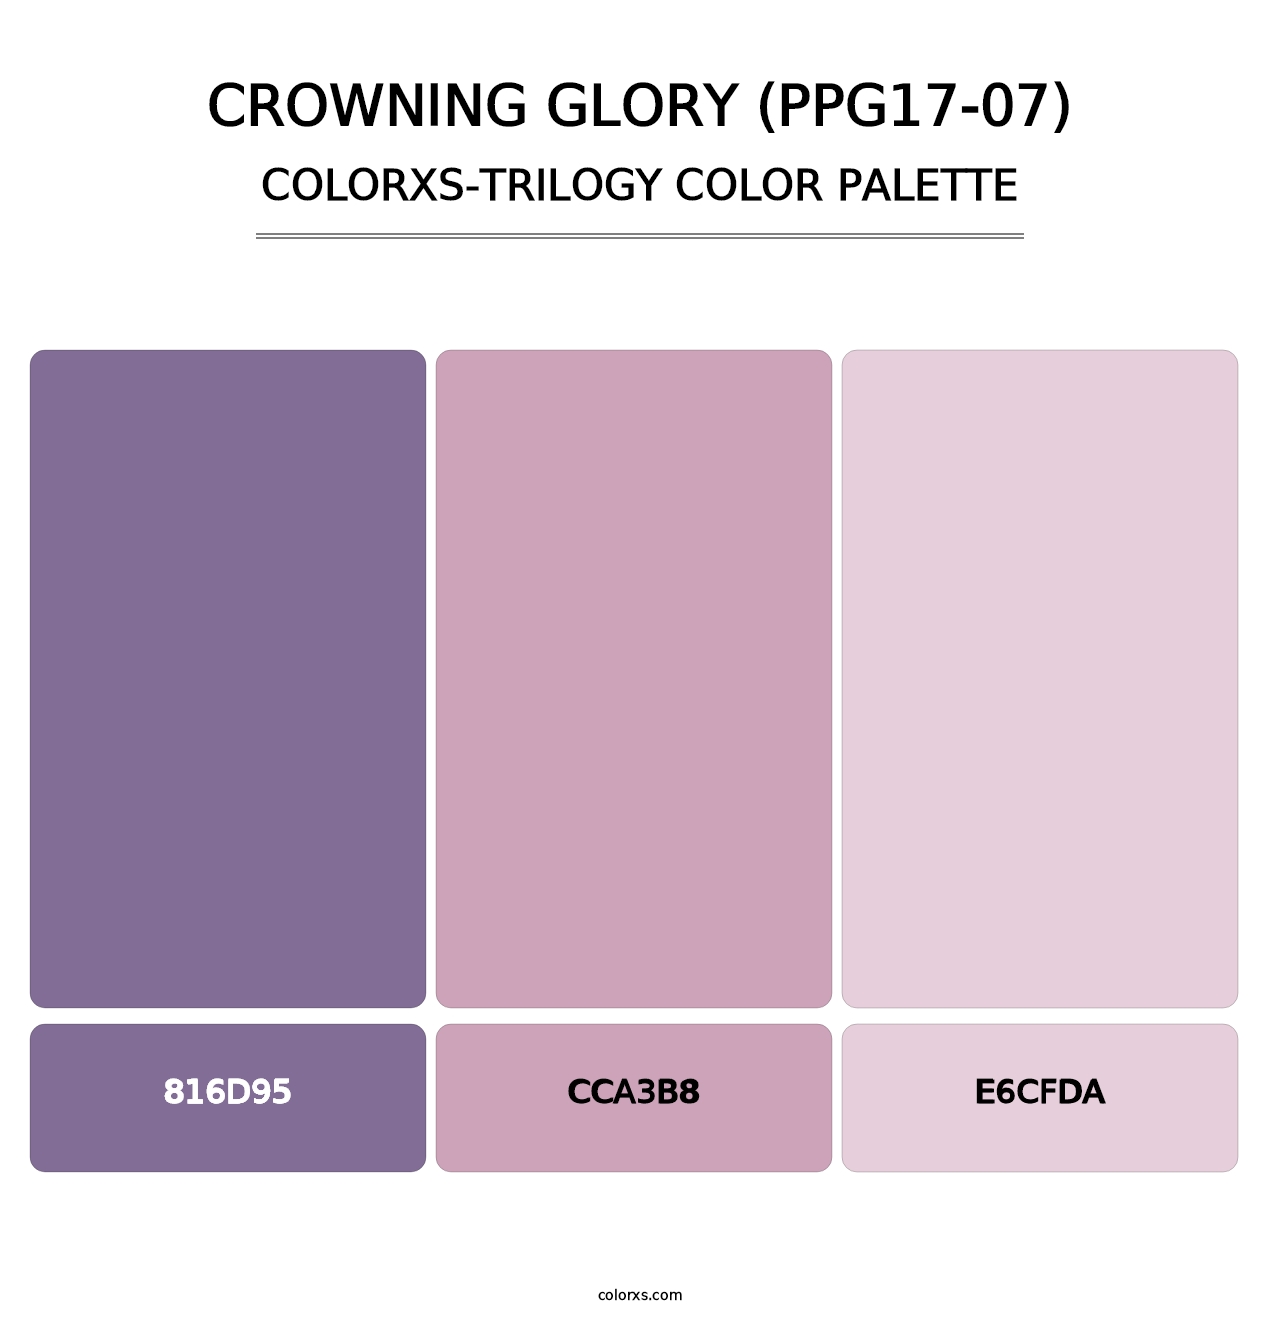 Crowning Glory (PPG17-07) - Colorxs Trilogy Palette